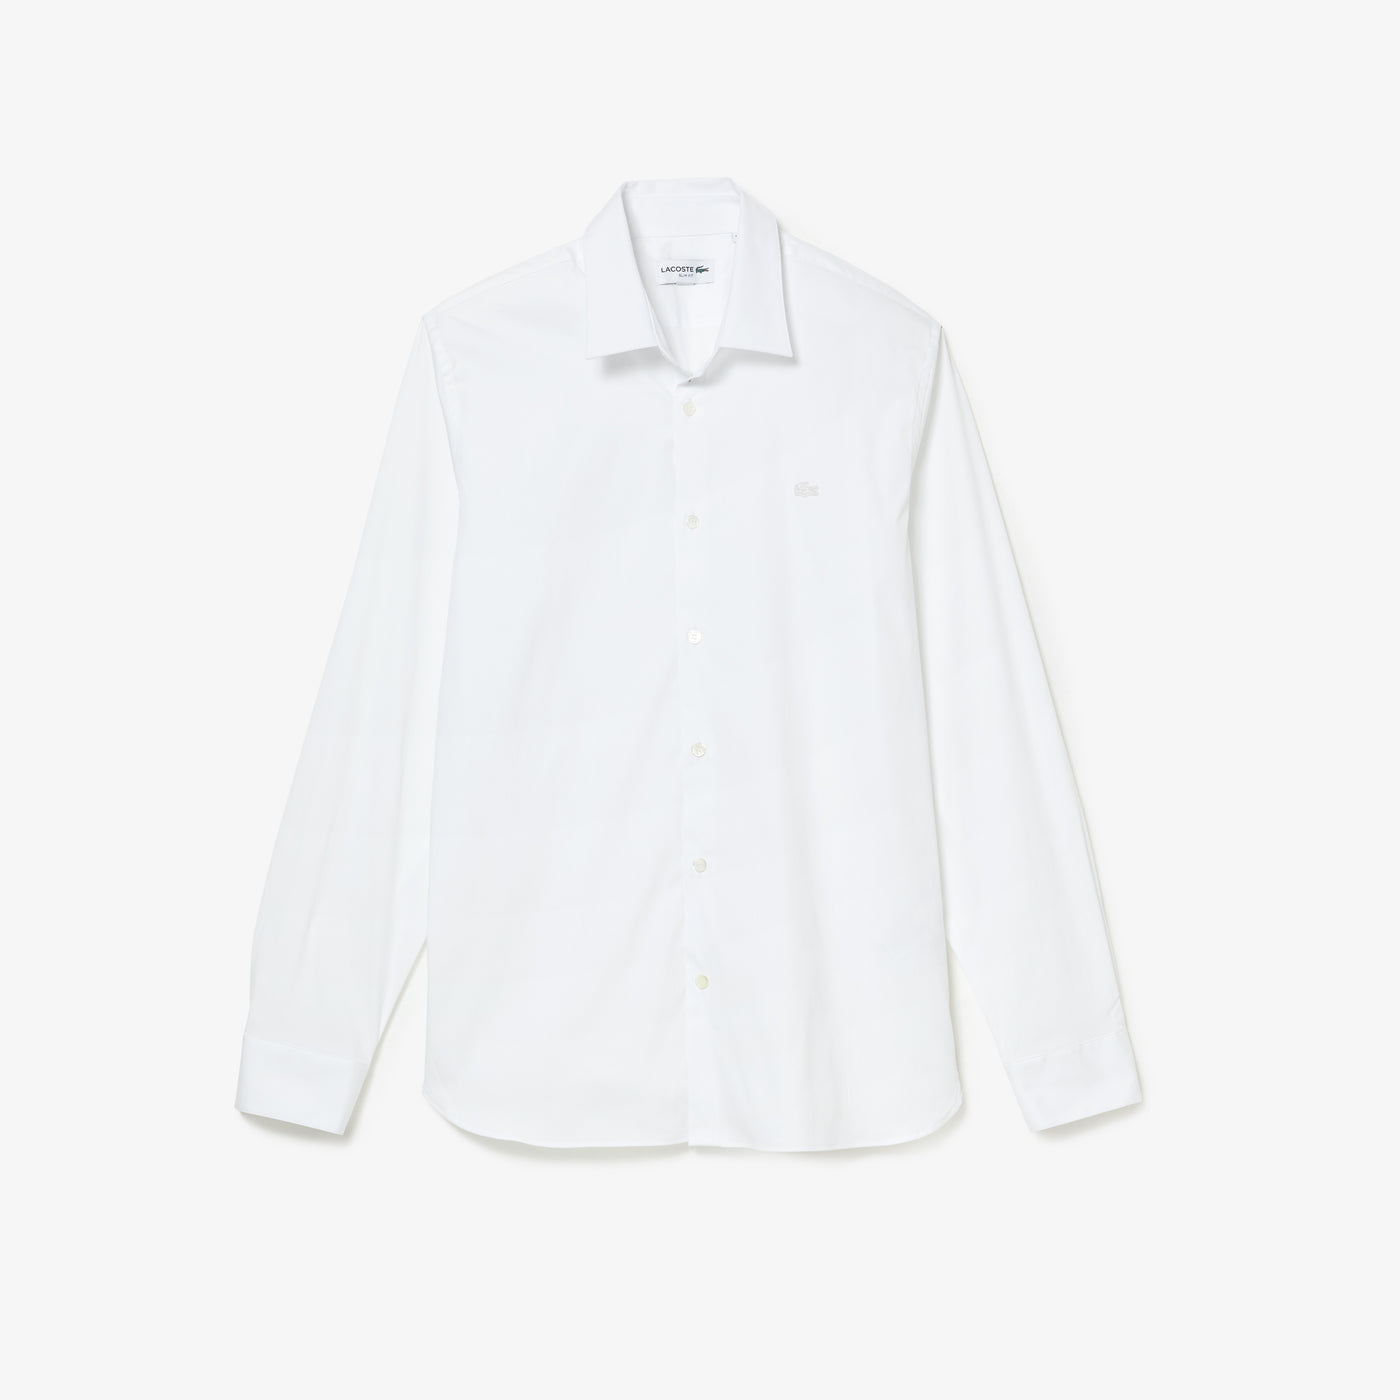 Shop The Latest Collection Of Lacoste Men'S Lacoste Slim Fit French Collar Cotton Poplin Shirt - Ch5253 In Lebanon